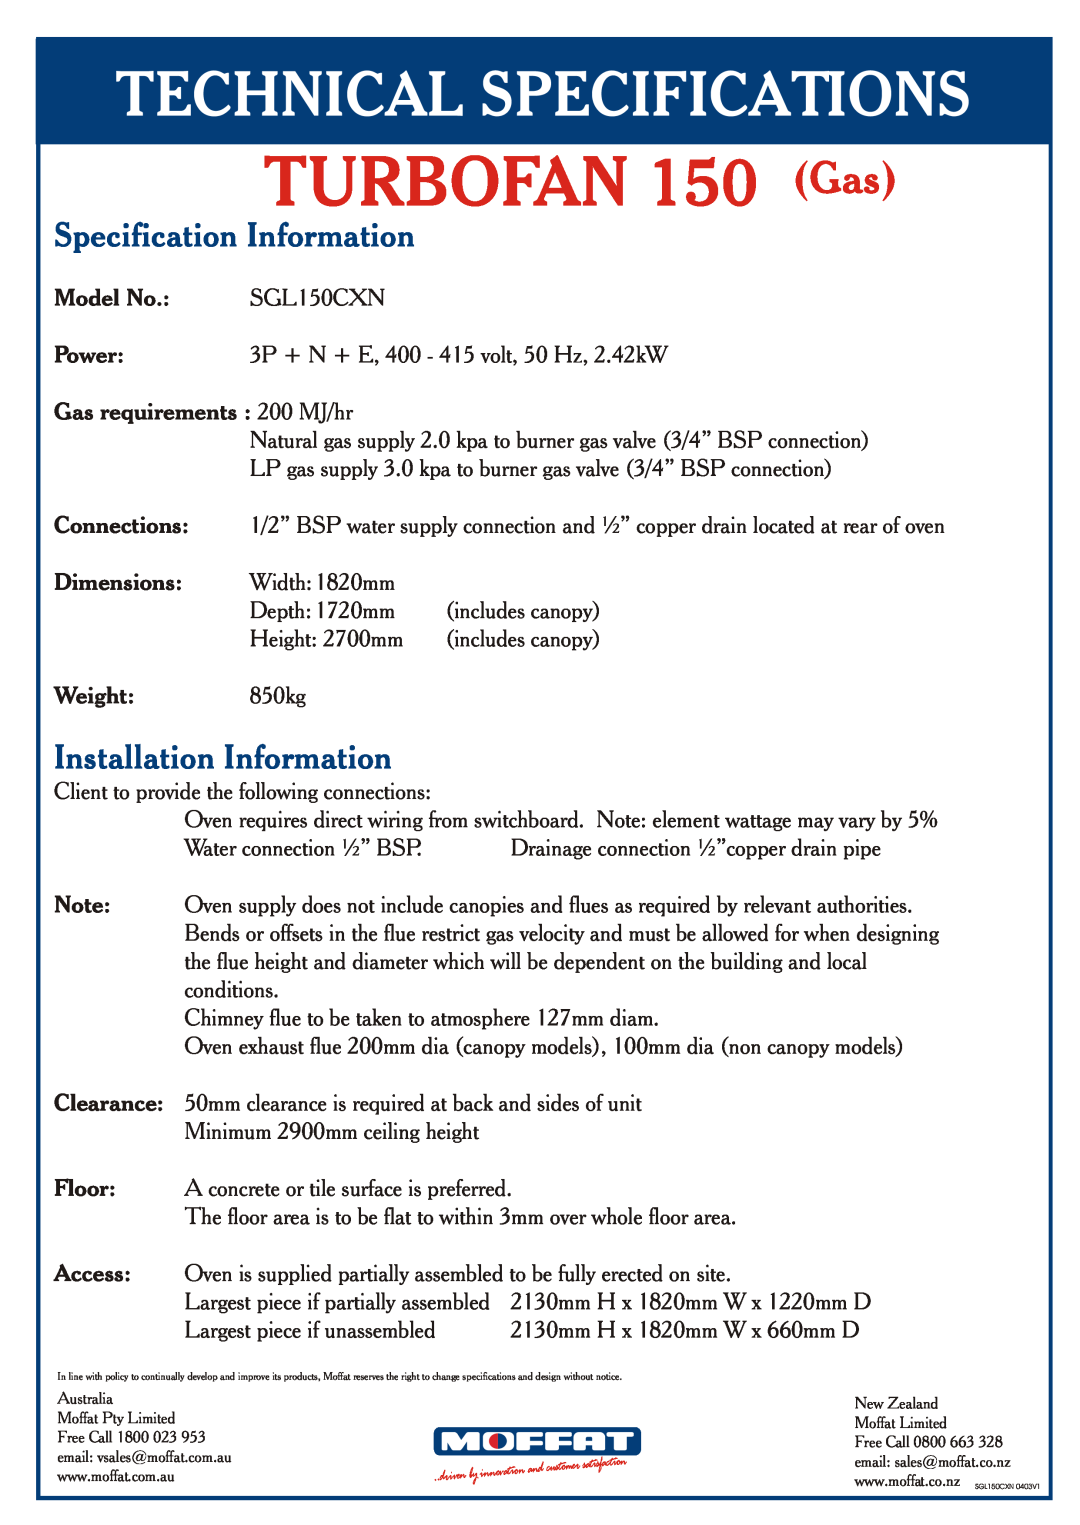 Moffat Turbofan 150 technical specifications Technical Specifications, TURBOFAN 150 Gas, Specification Information, Weight 